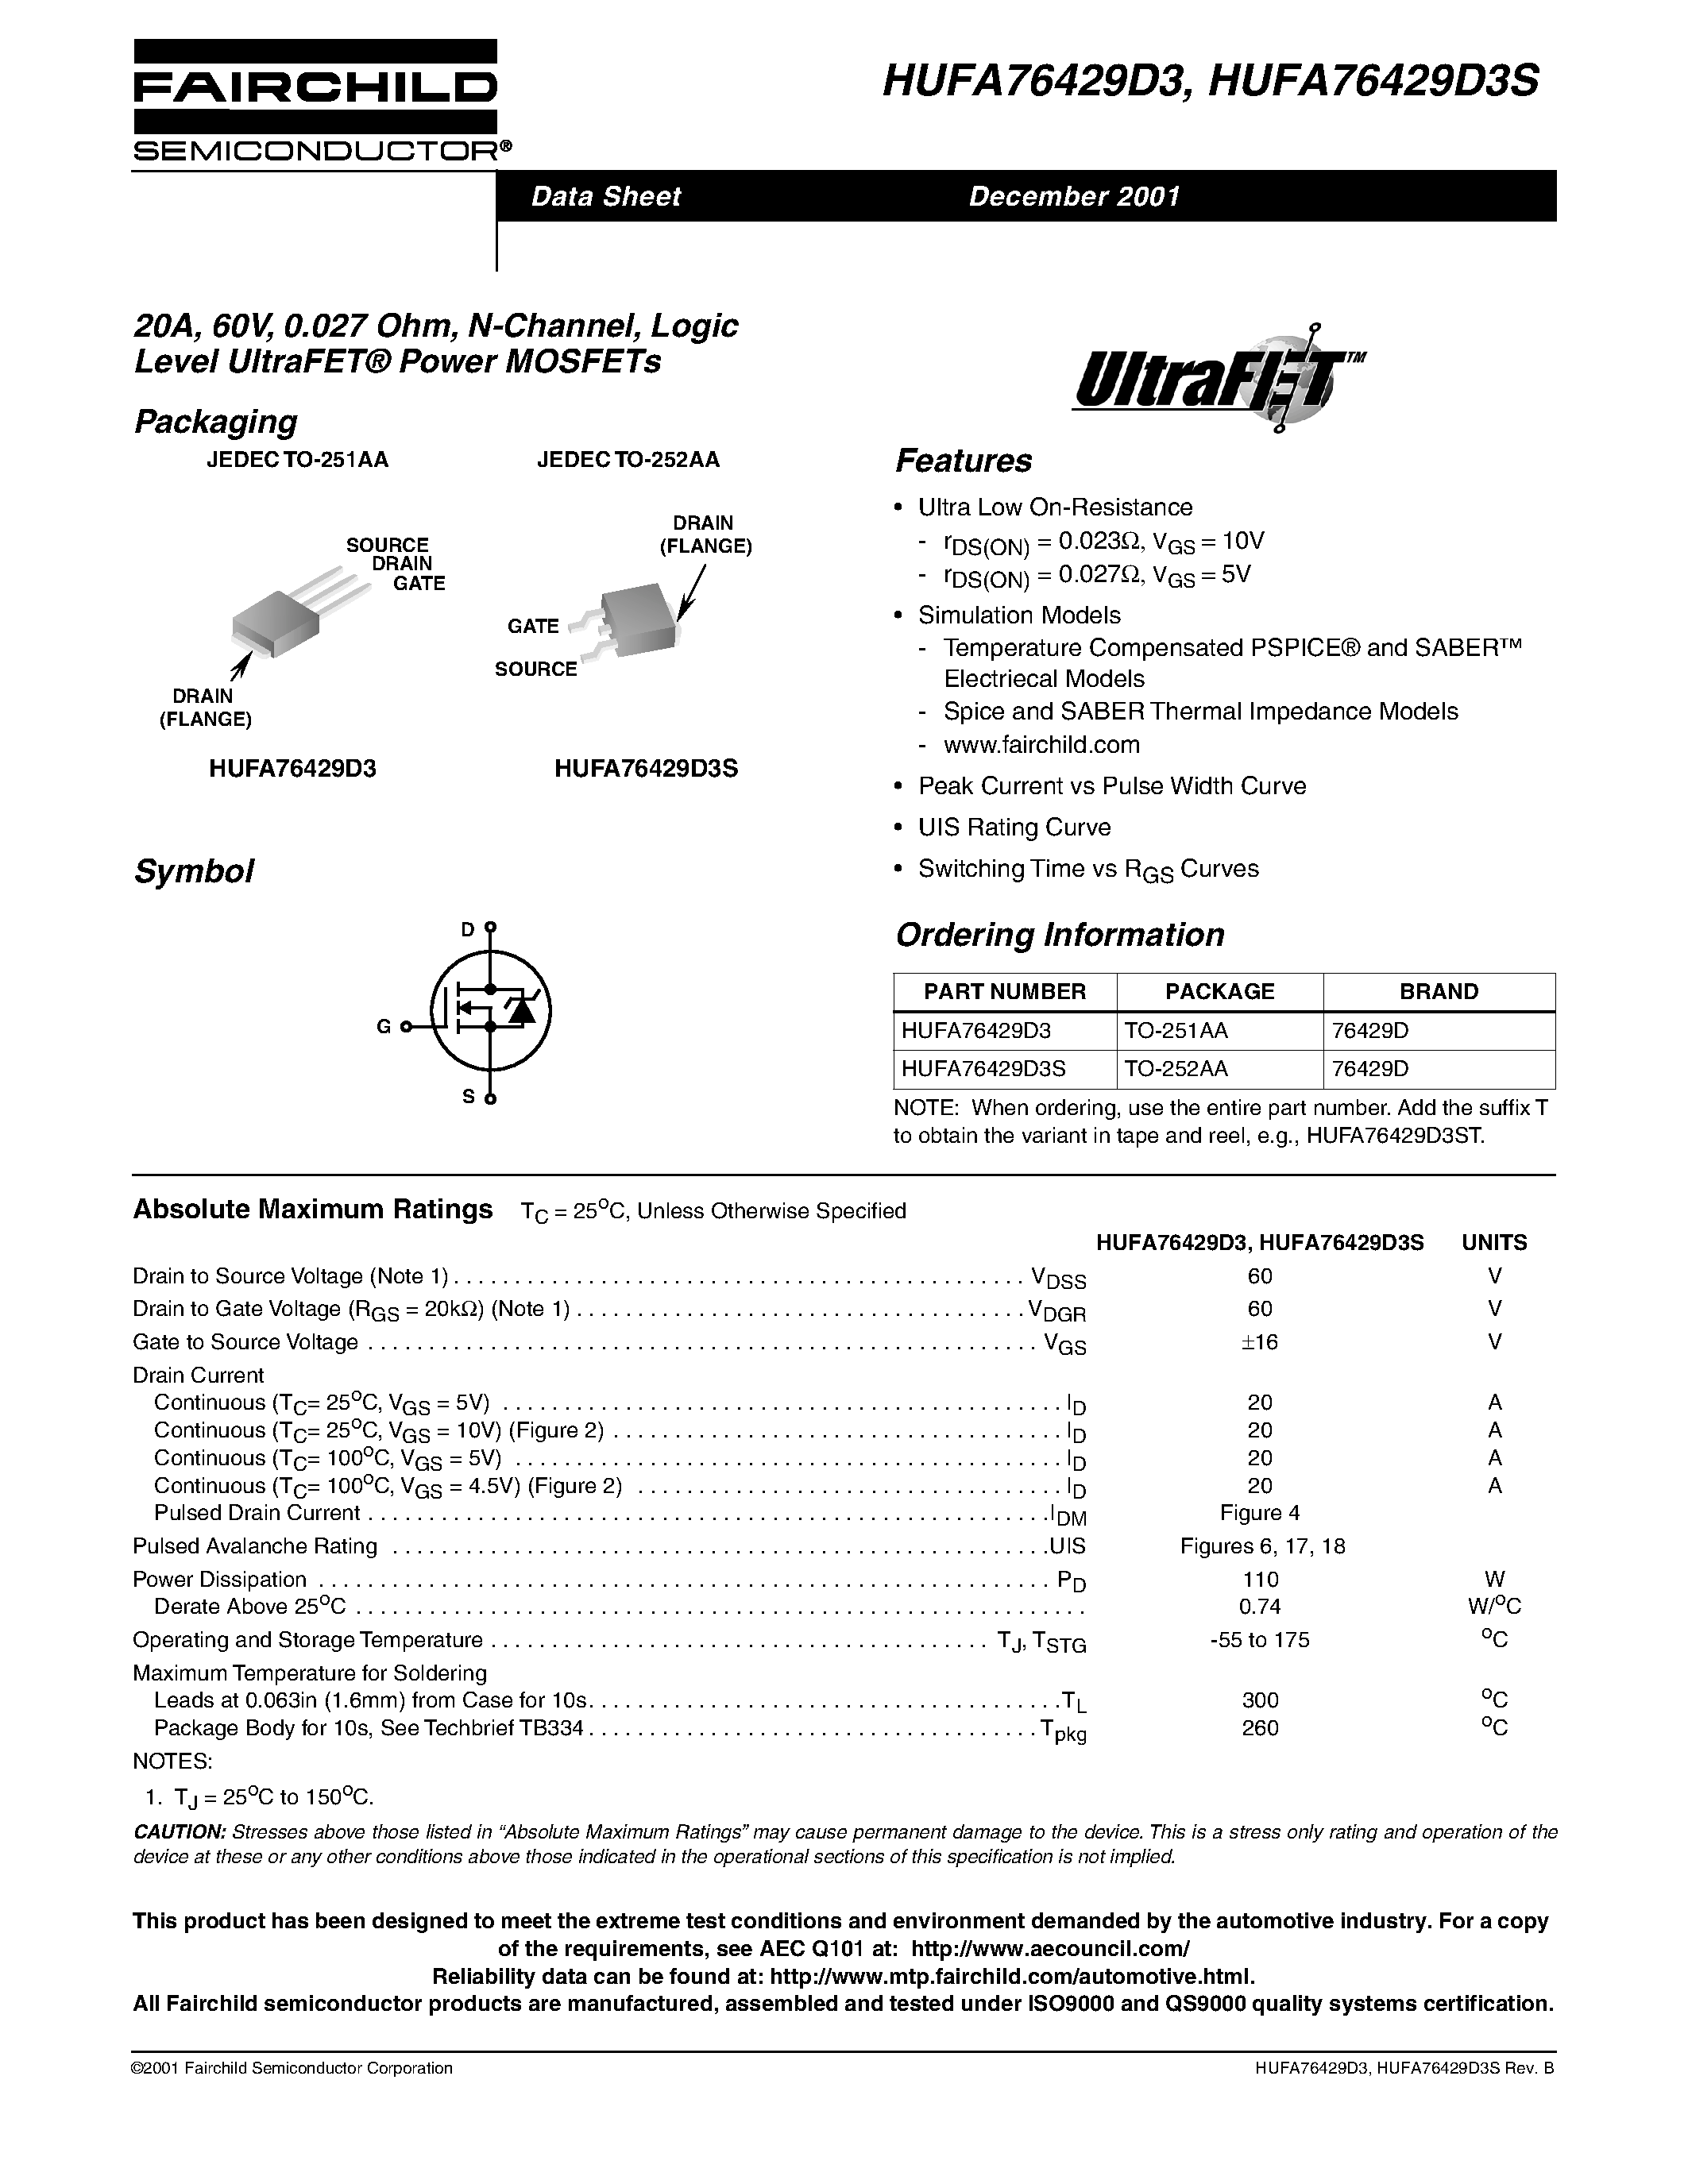 Datasheet HUFA76429D3 - 20A/ 60V/ 0.027 Ohm/ N-Channel/ Logic Level UltraFET Power MOSFETs page 1